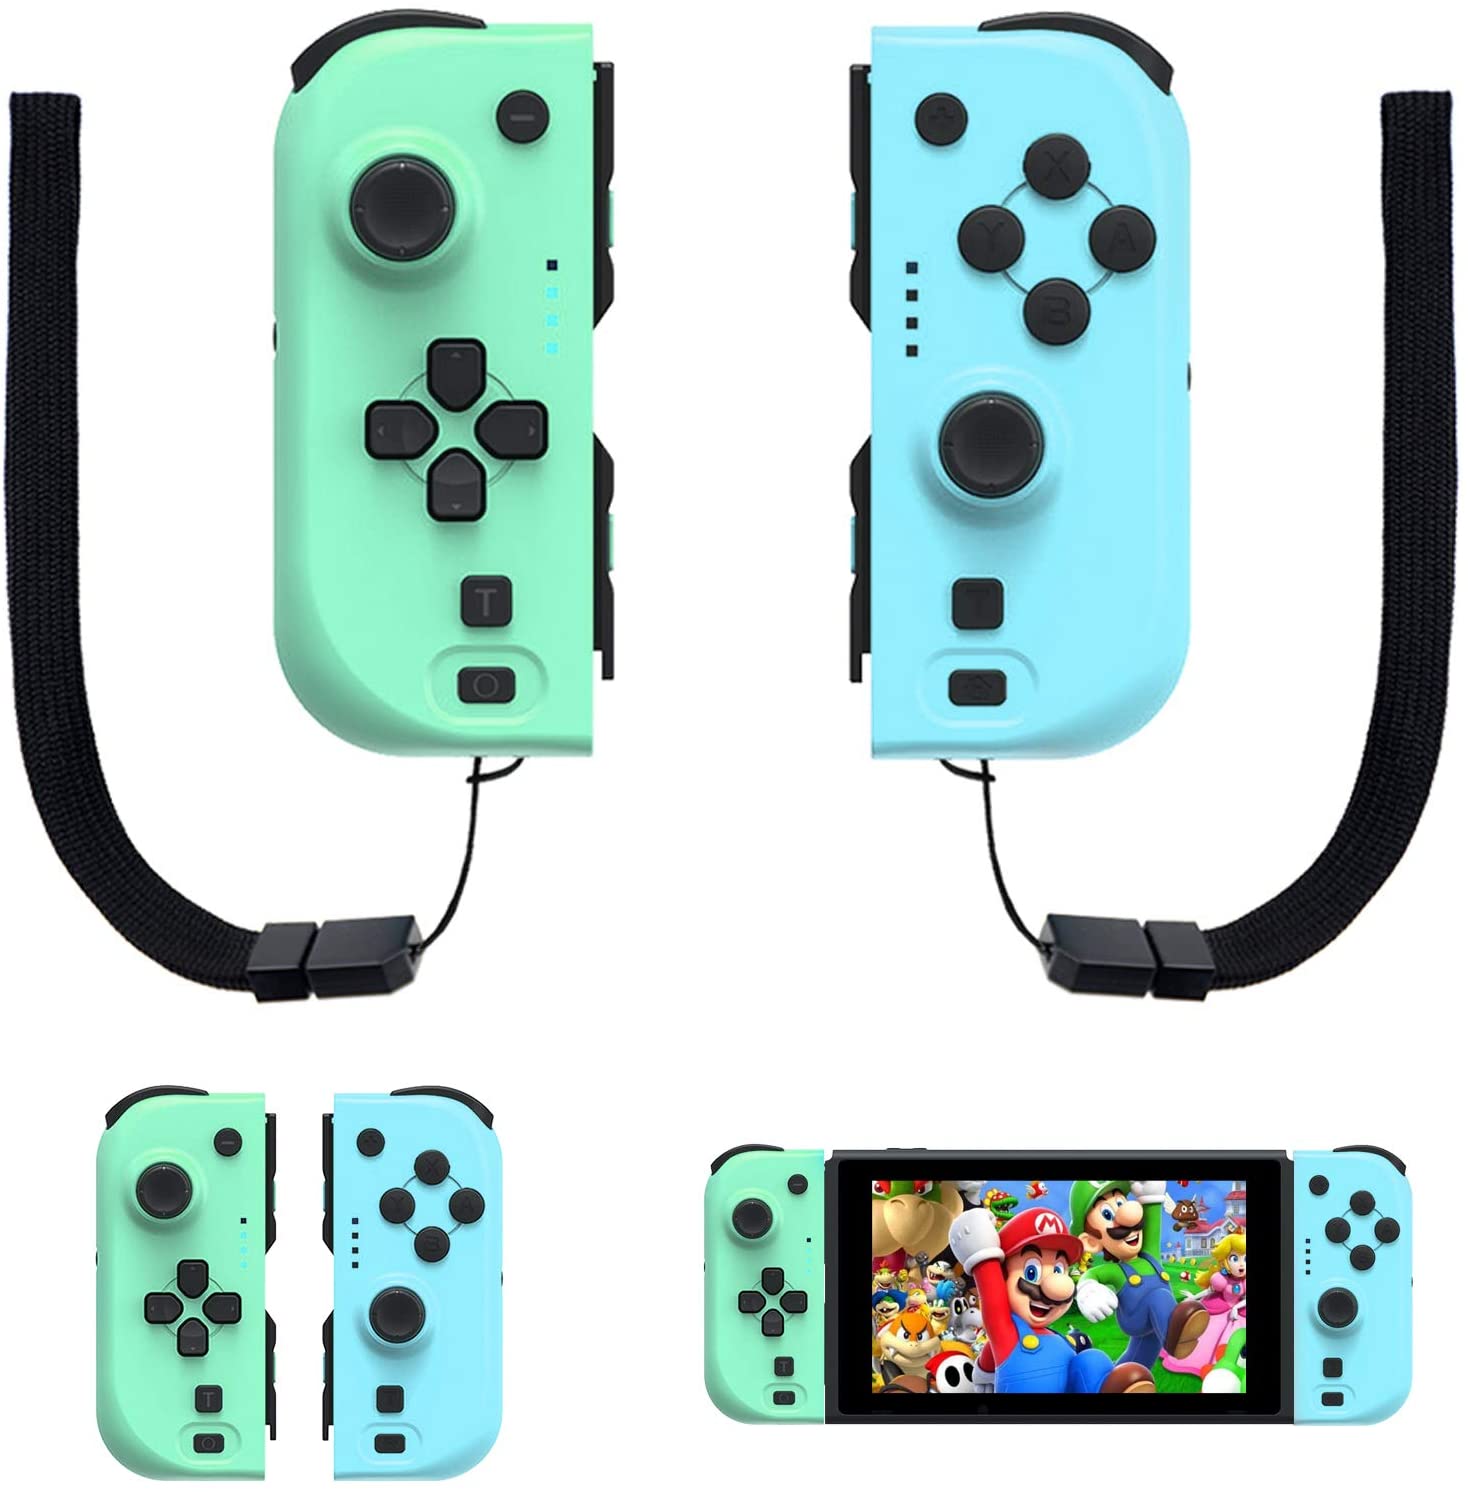 Green & Blue Switch Joy-Cons come with two straps.